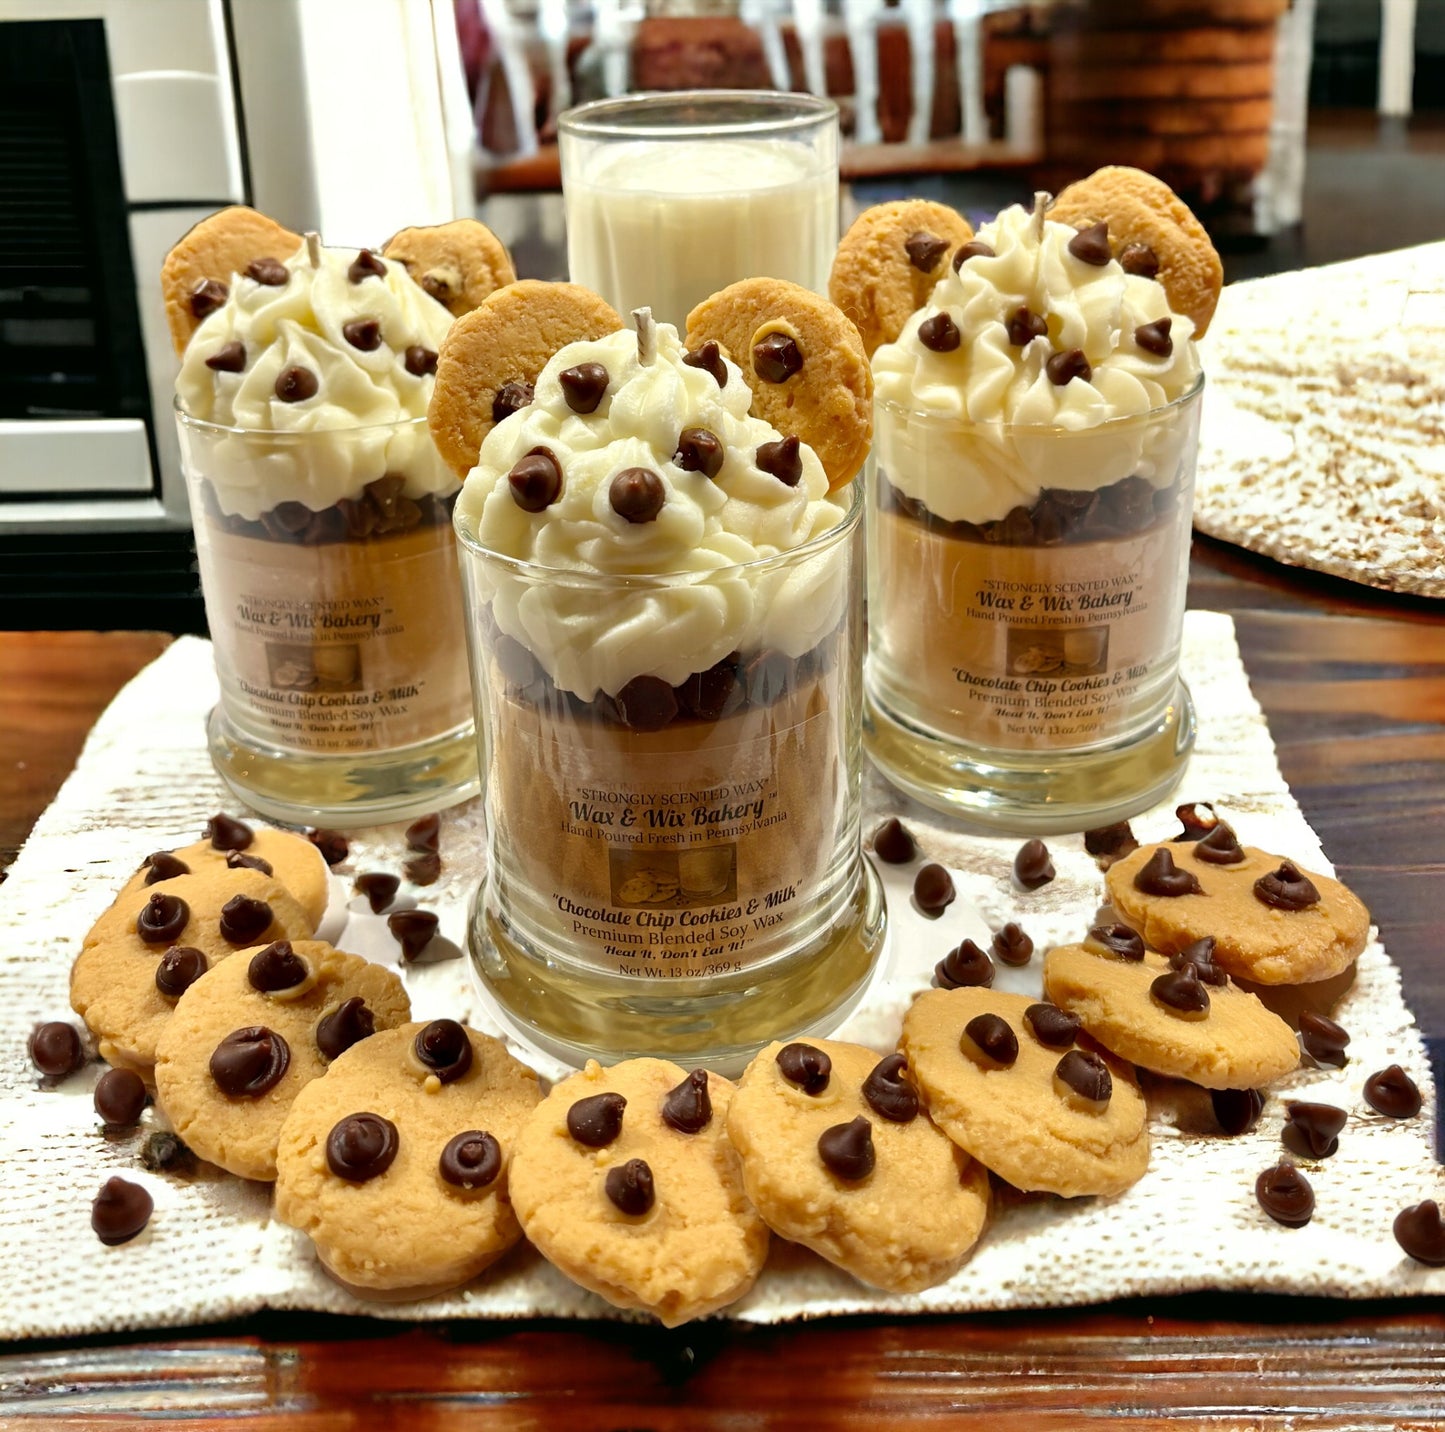 Chocolate Chip Cookie Candle. 13 oz. Soy Candle/Chocolate Chip Cookies/Chocolate Chips. Strongly Scented Candle